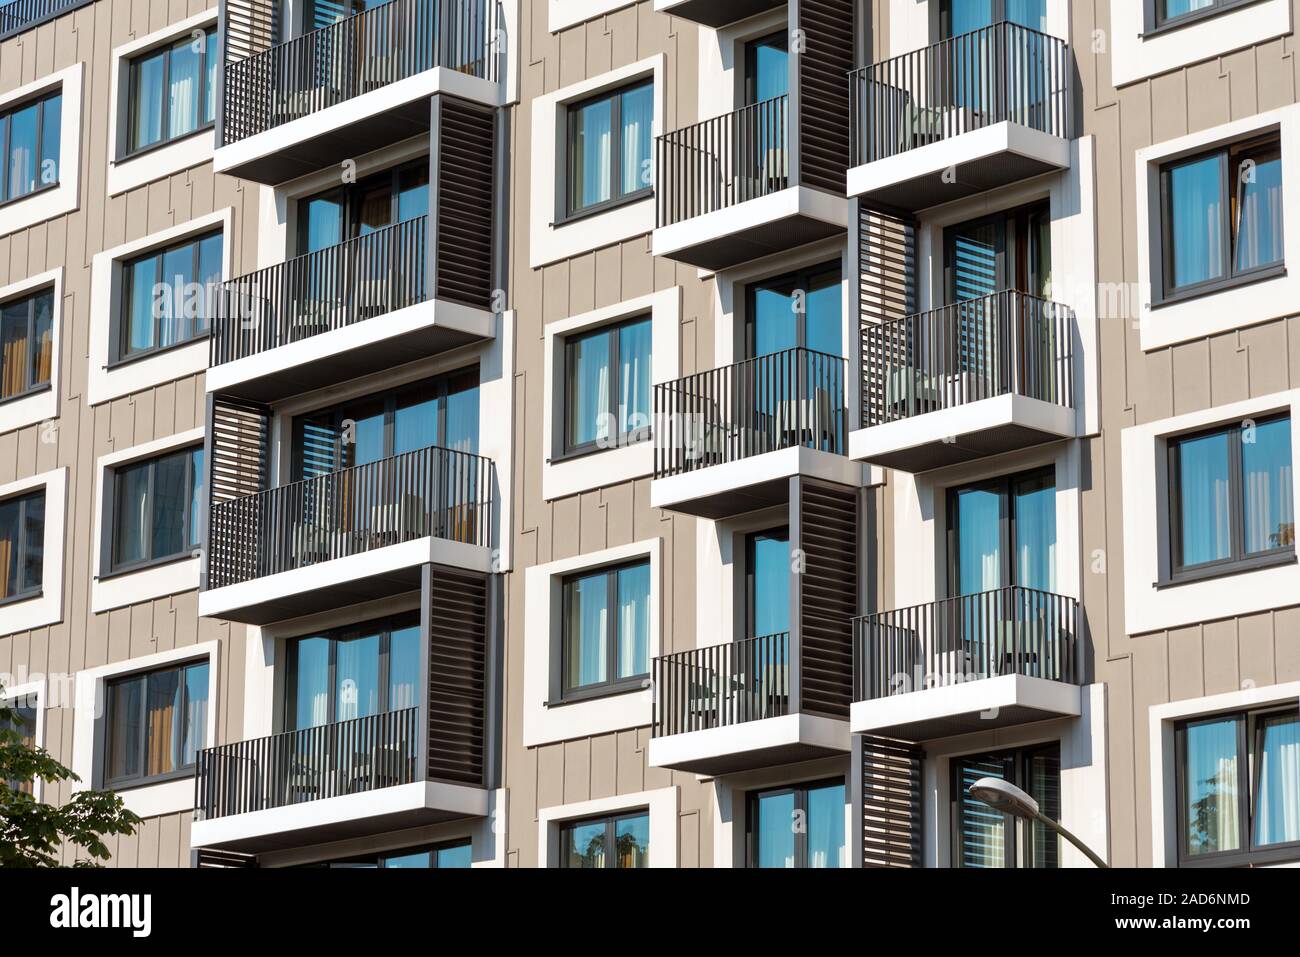 Detail of a modern apartment building with lots of balconies Stock Photo